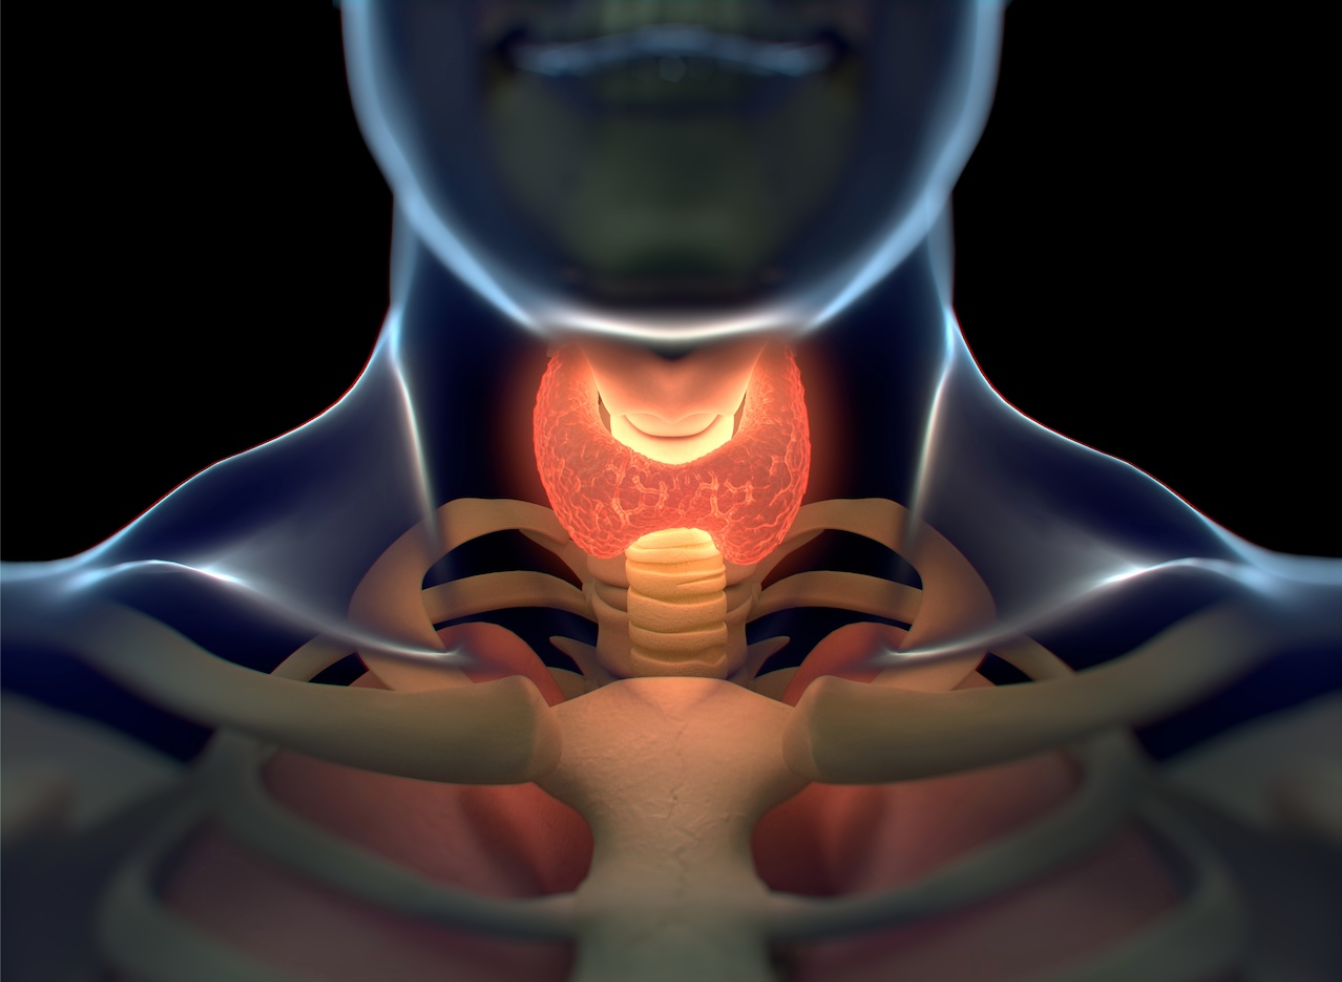 Oncology Overview: Selpercatinib in the Treatment of Medullary Thyroid Cancer